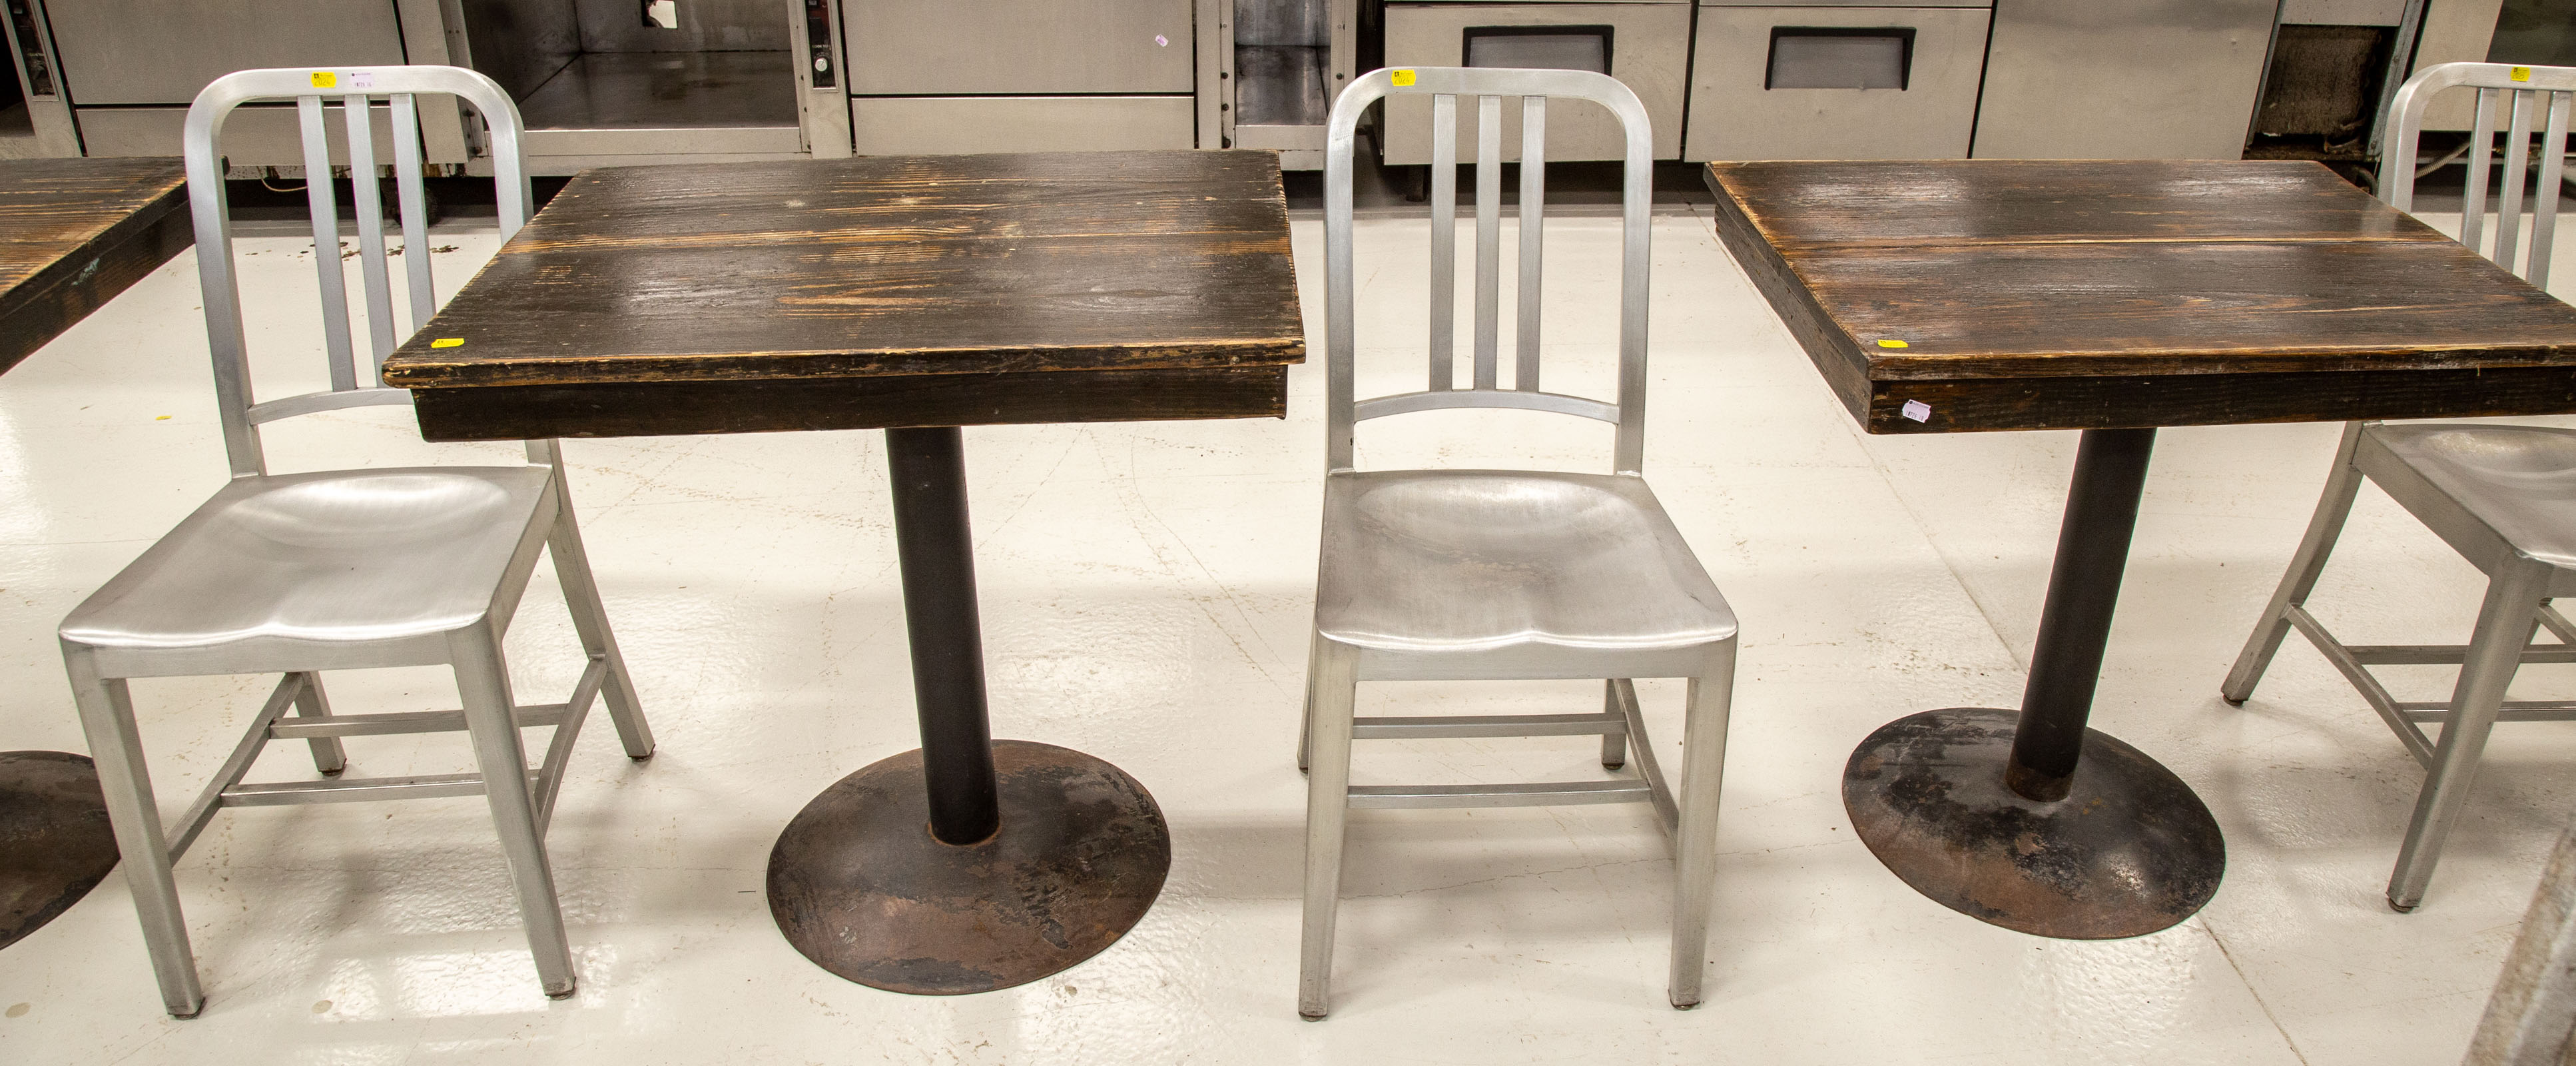 TWO WOODBERRY KITCHEN TABLES & TWO ALUMINUM